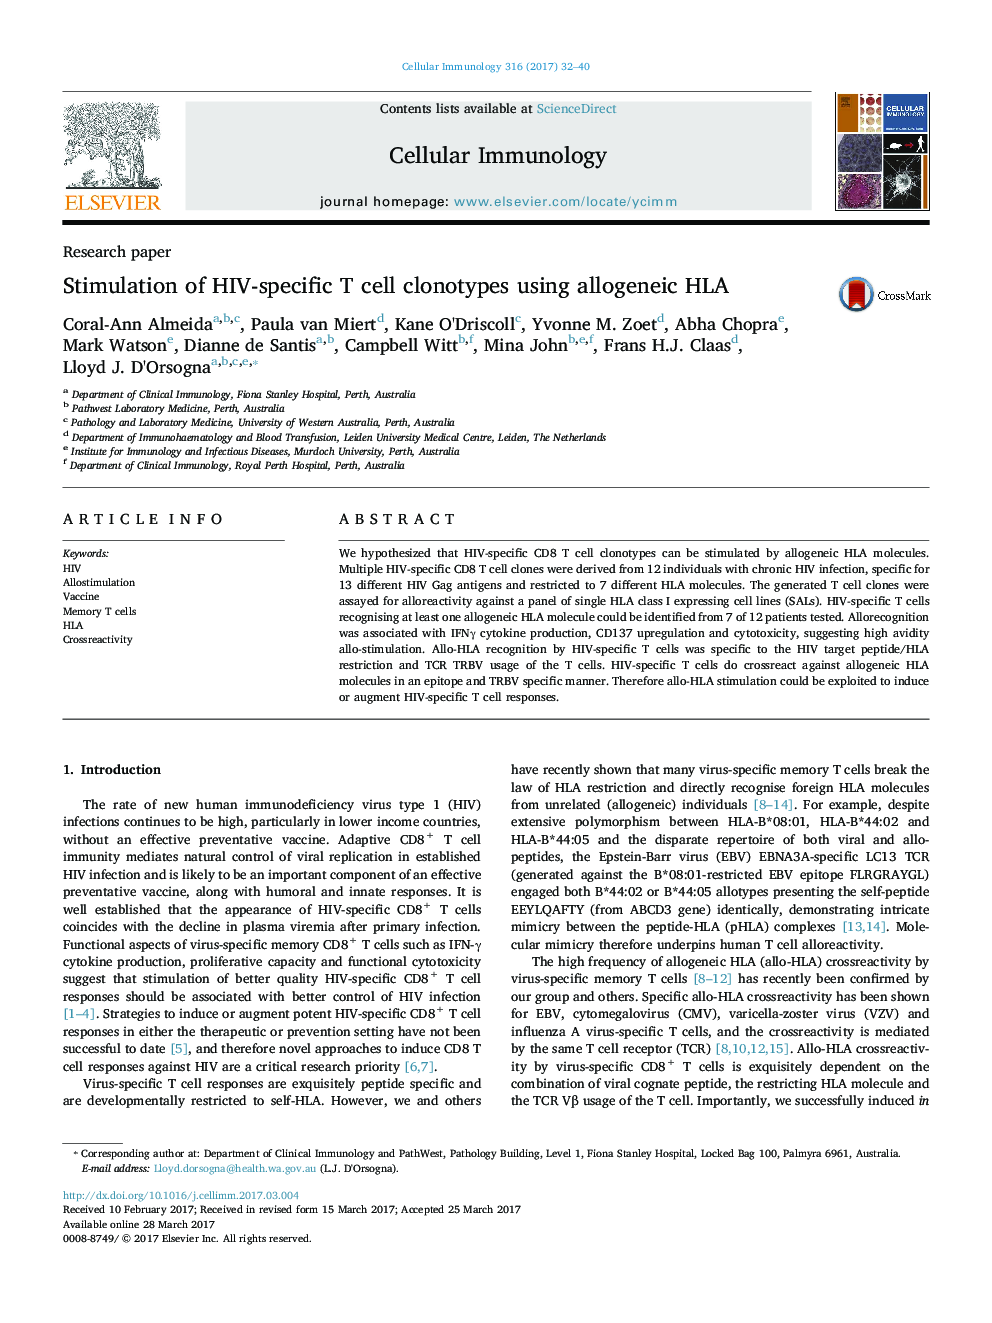 Research paperStimulation of HIV-specific T cell clonotypes using allogeneic HLA